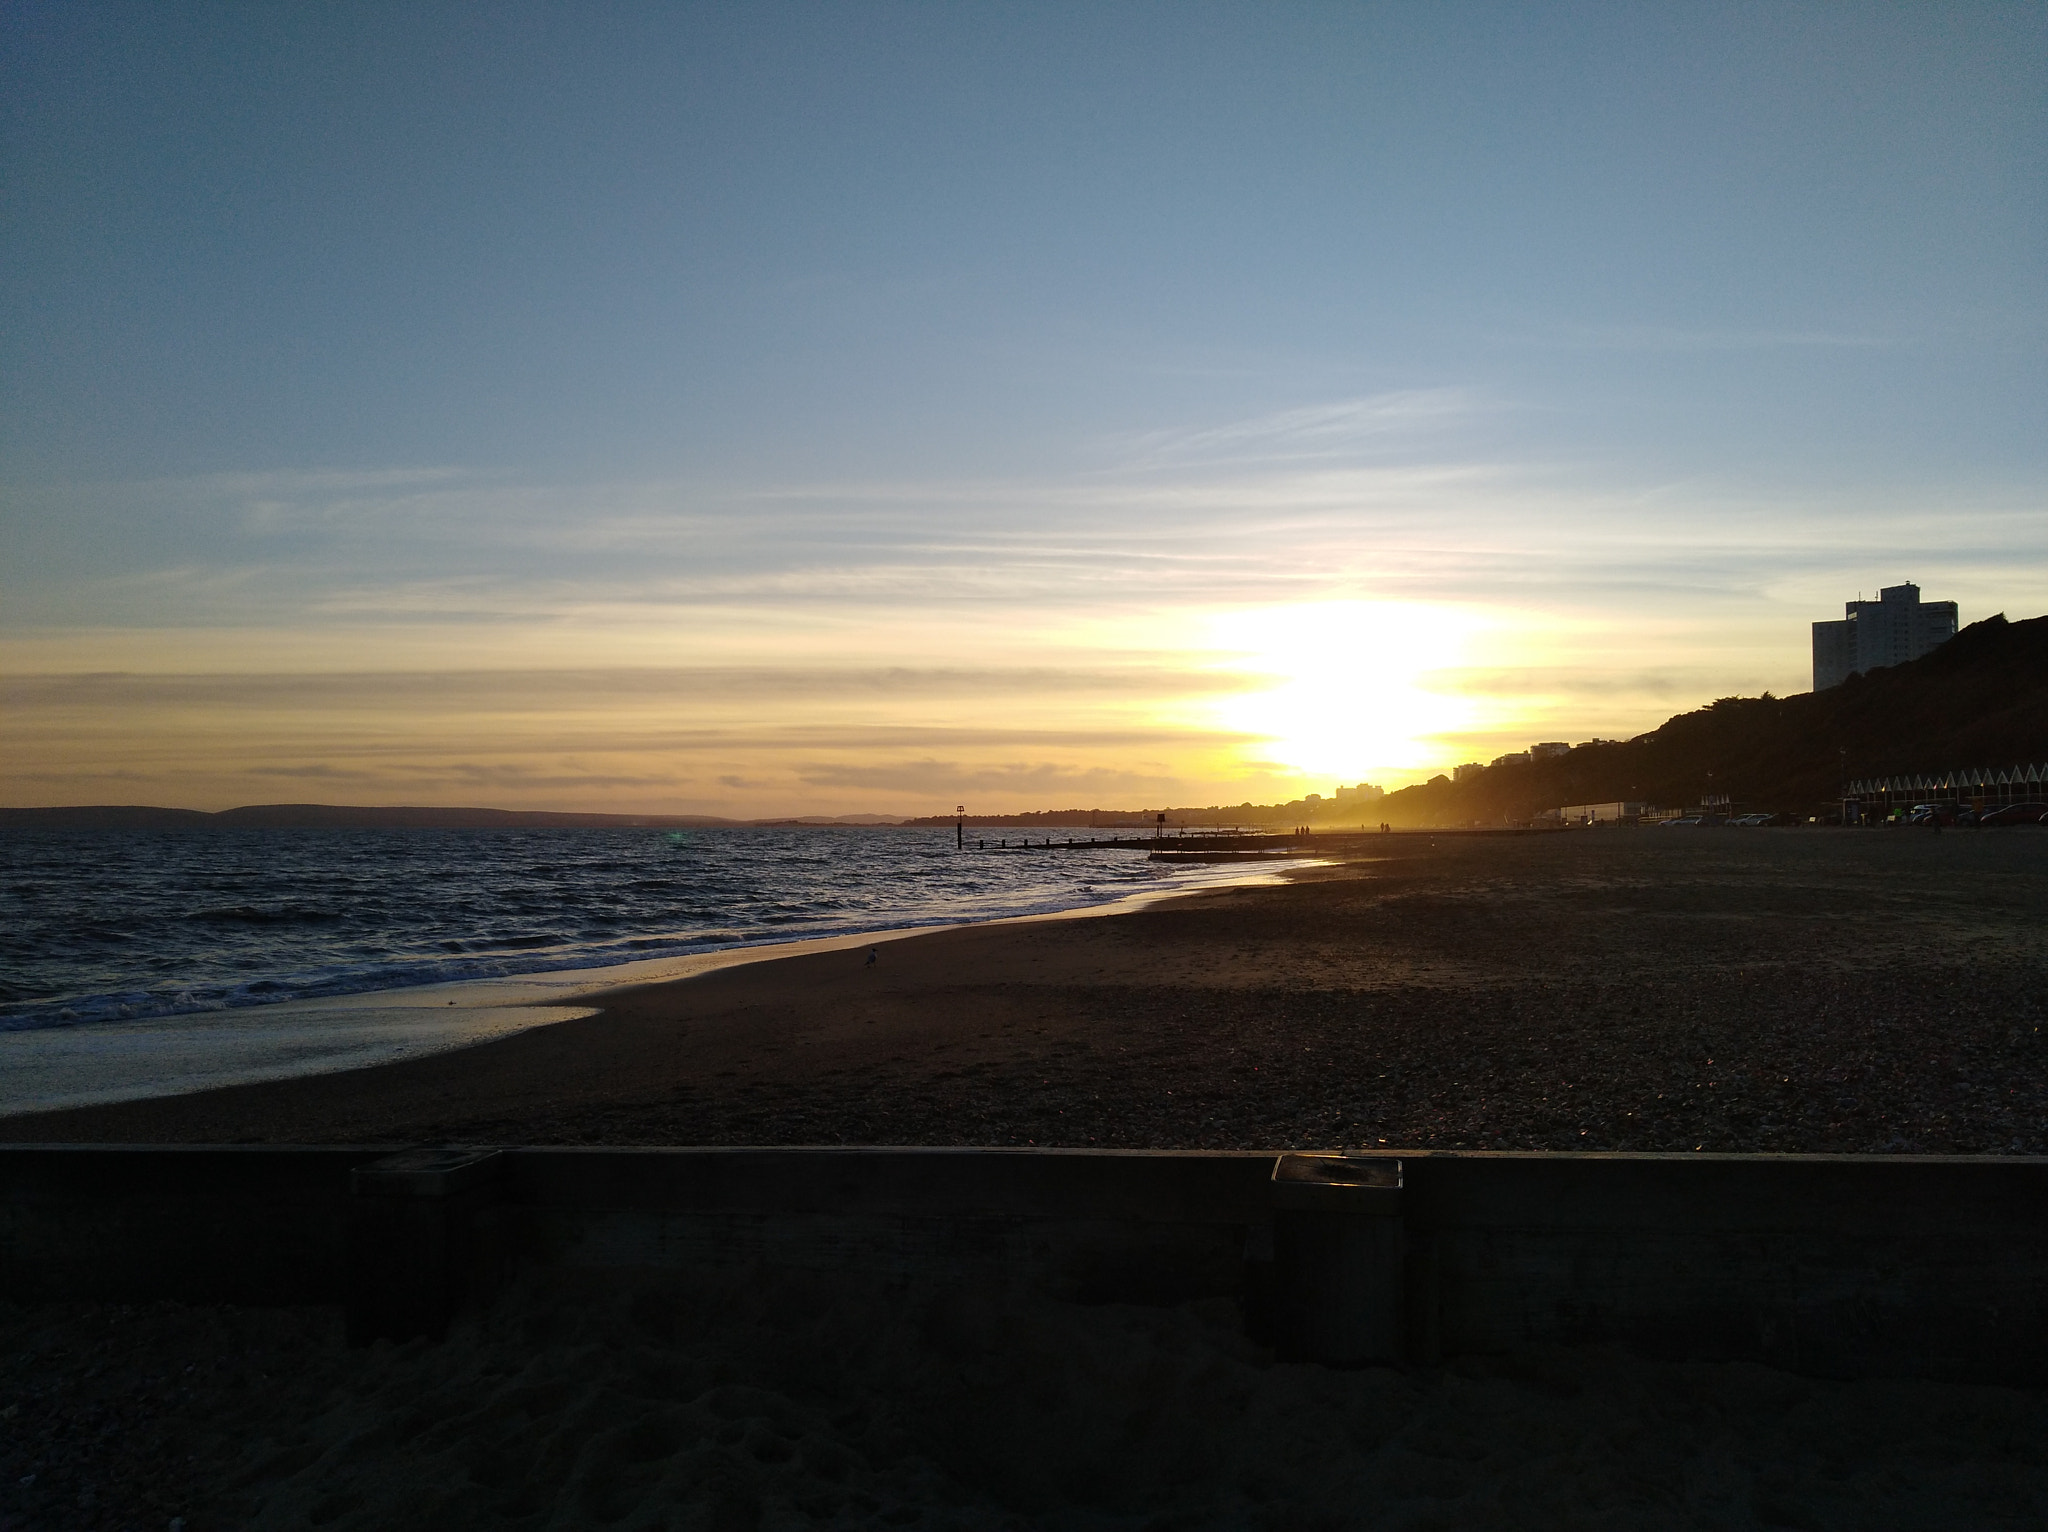 HUAWEI Y7 sample photo. Sunset at the bournemouth beach 🌅 photography